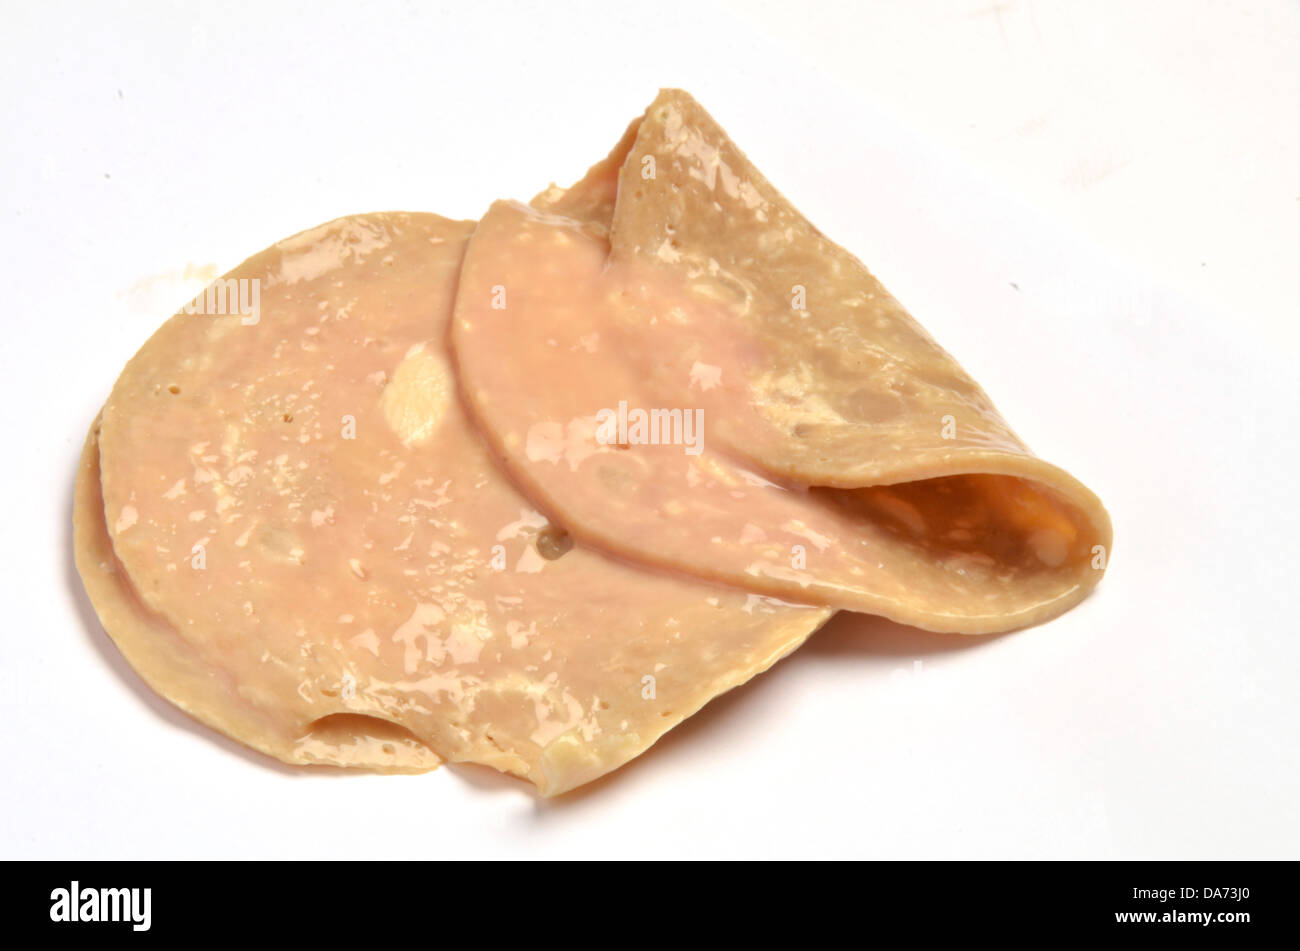 Old decomposing dried rotten ham and chicken pieces Stock Photo